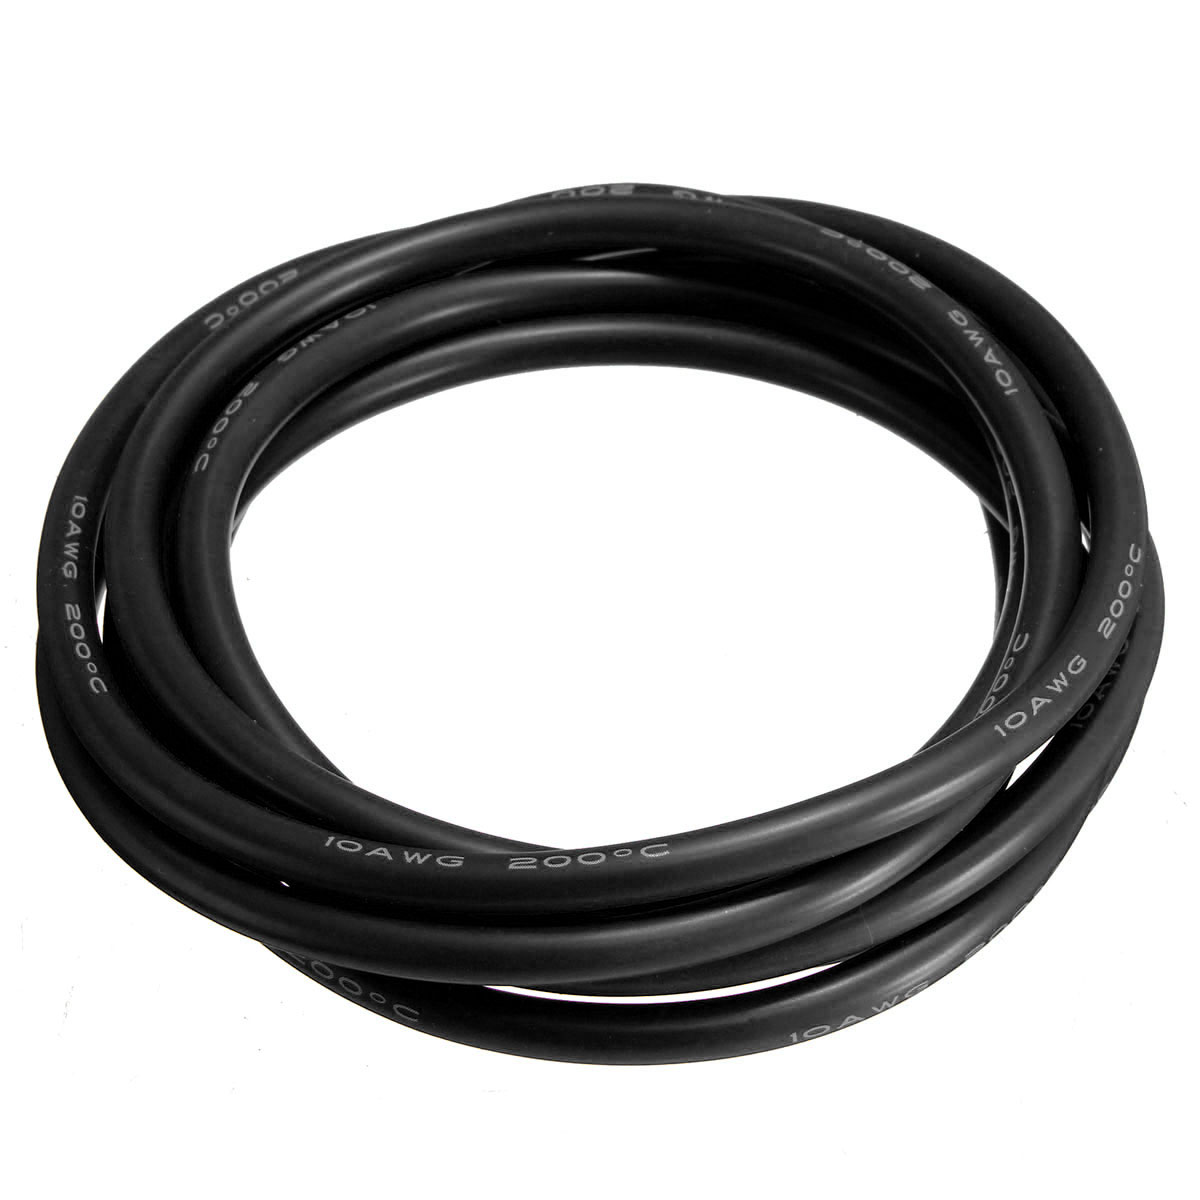 DANIU-2-Meter-Black-Silicone-Wire-Cable-10121416182022AWG-Flexible-Cable-1170287-7